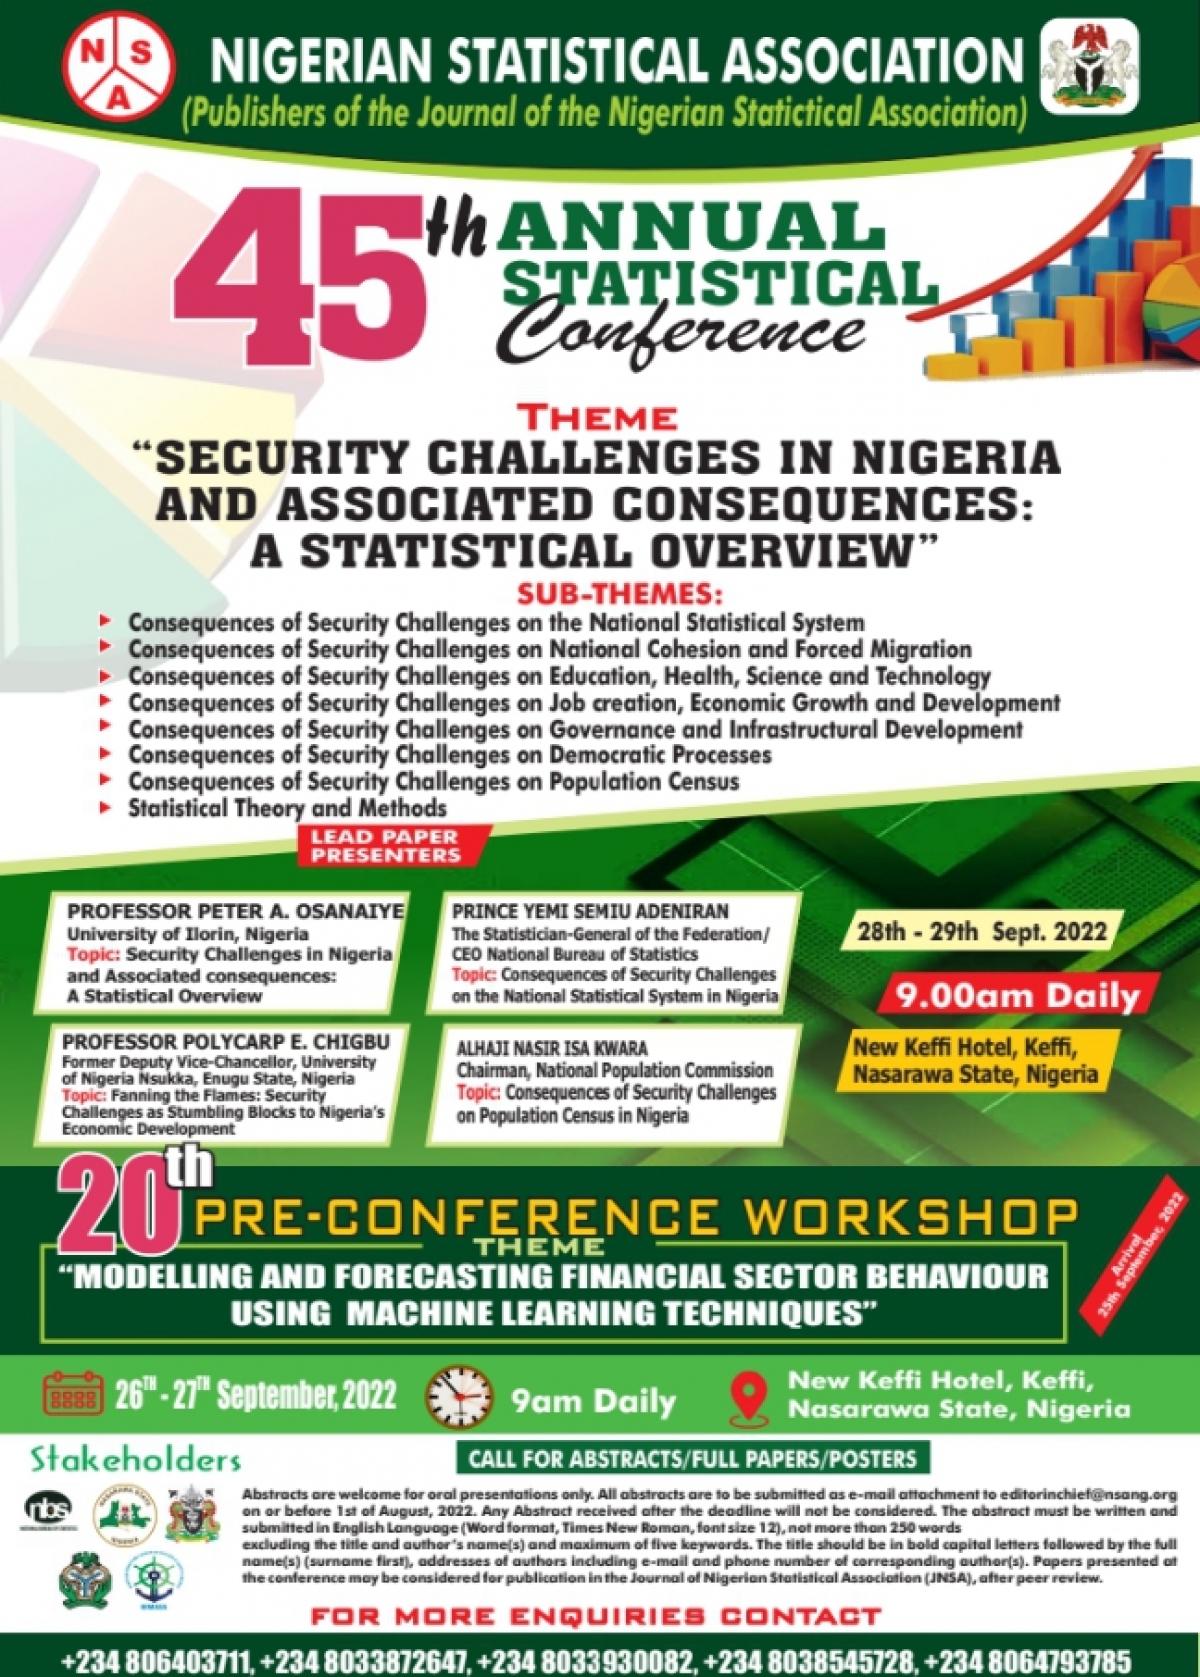 The 45th Annual Statistical Conference 2022